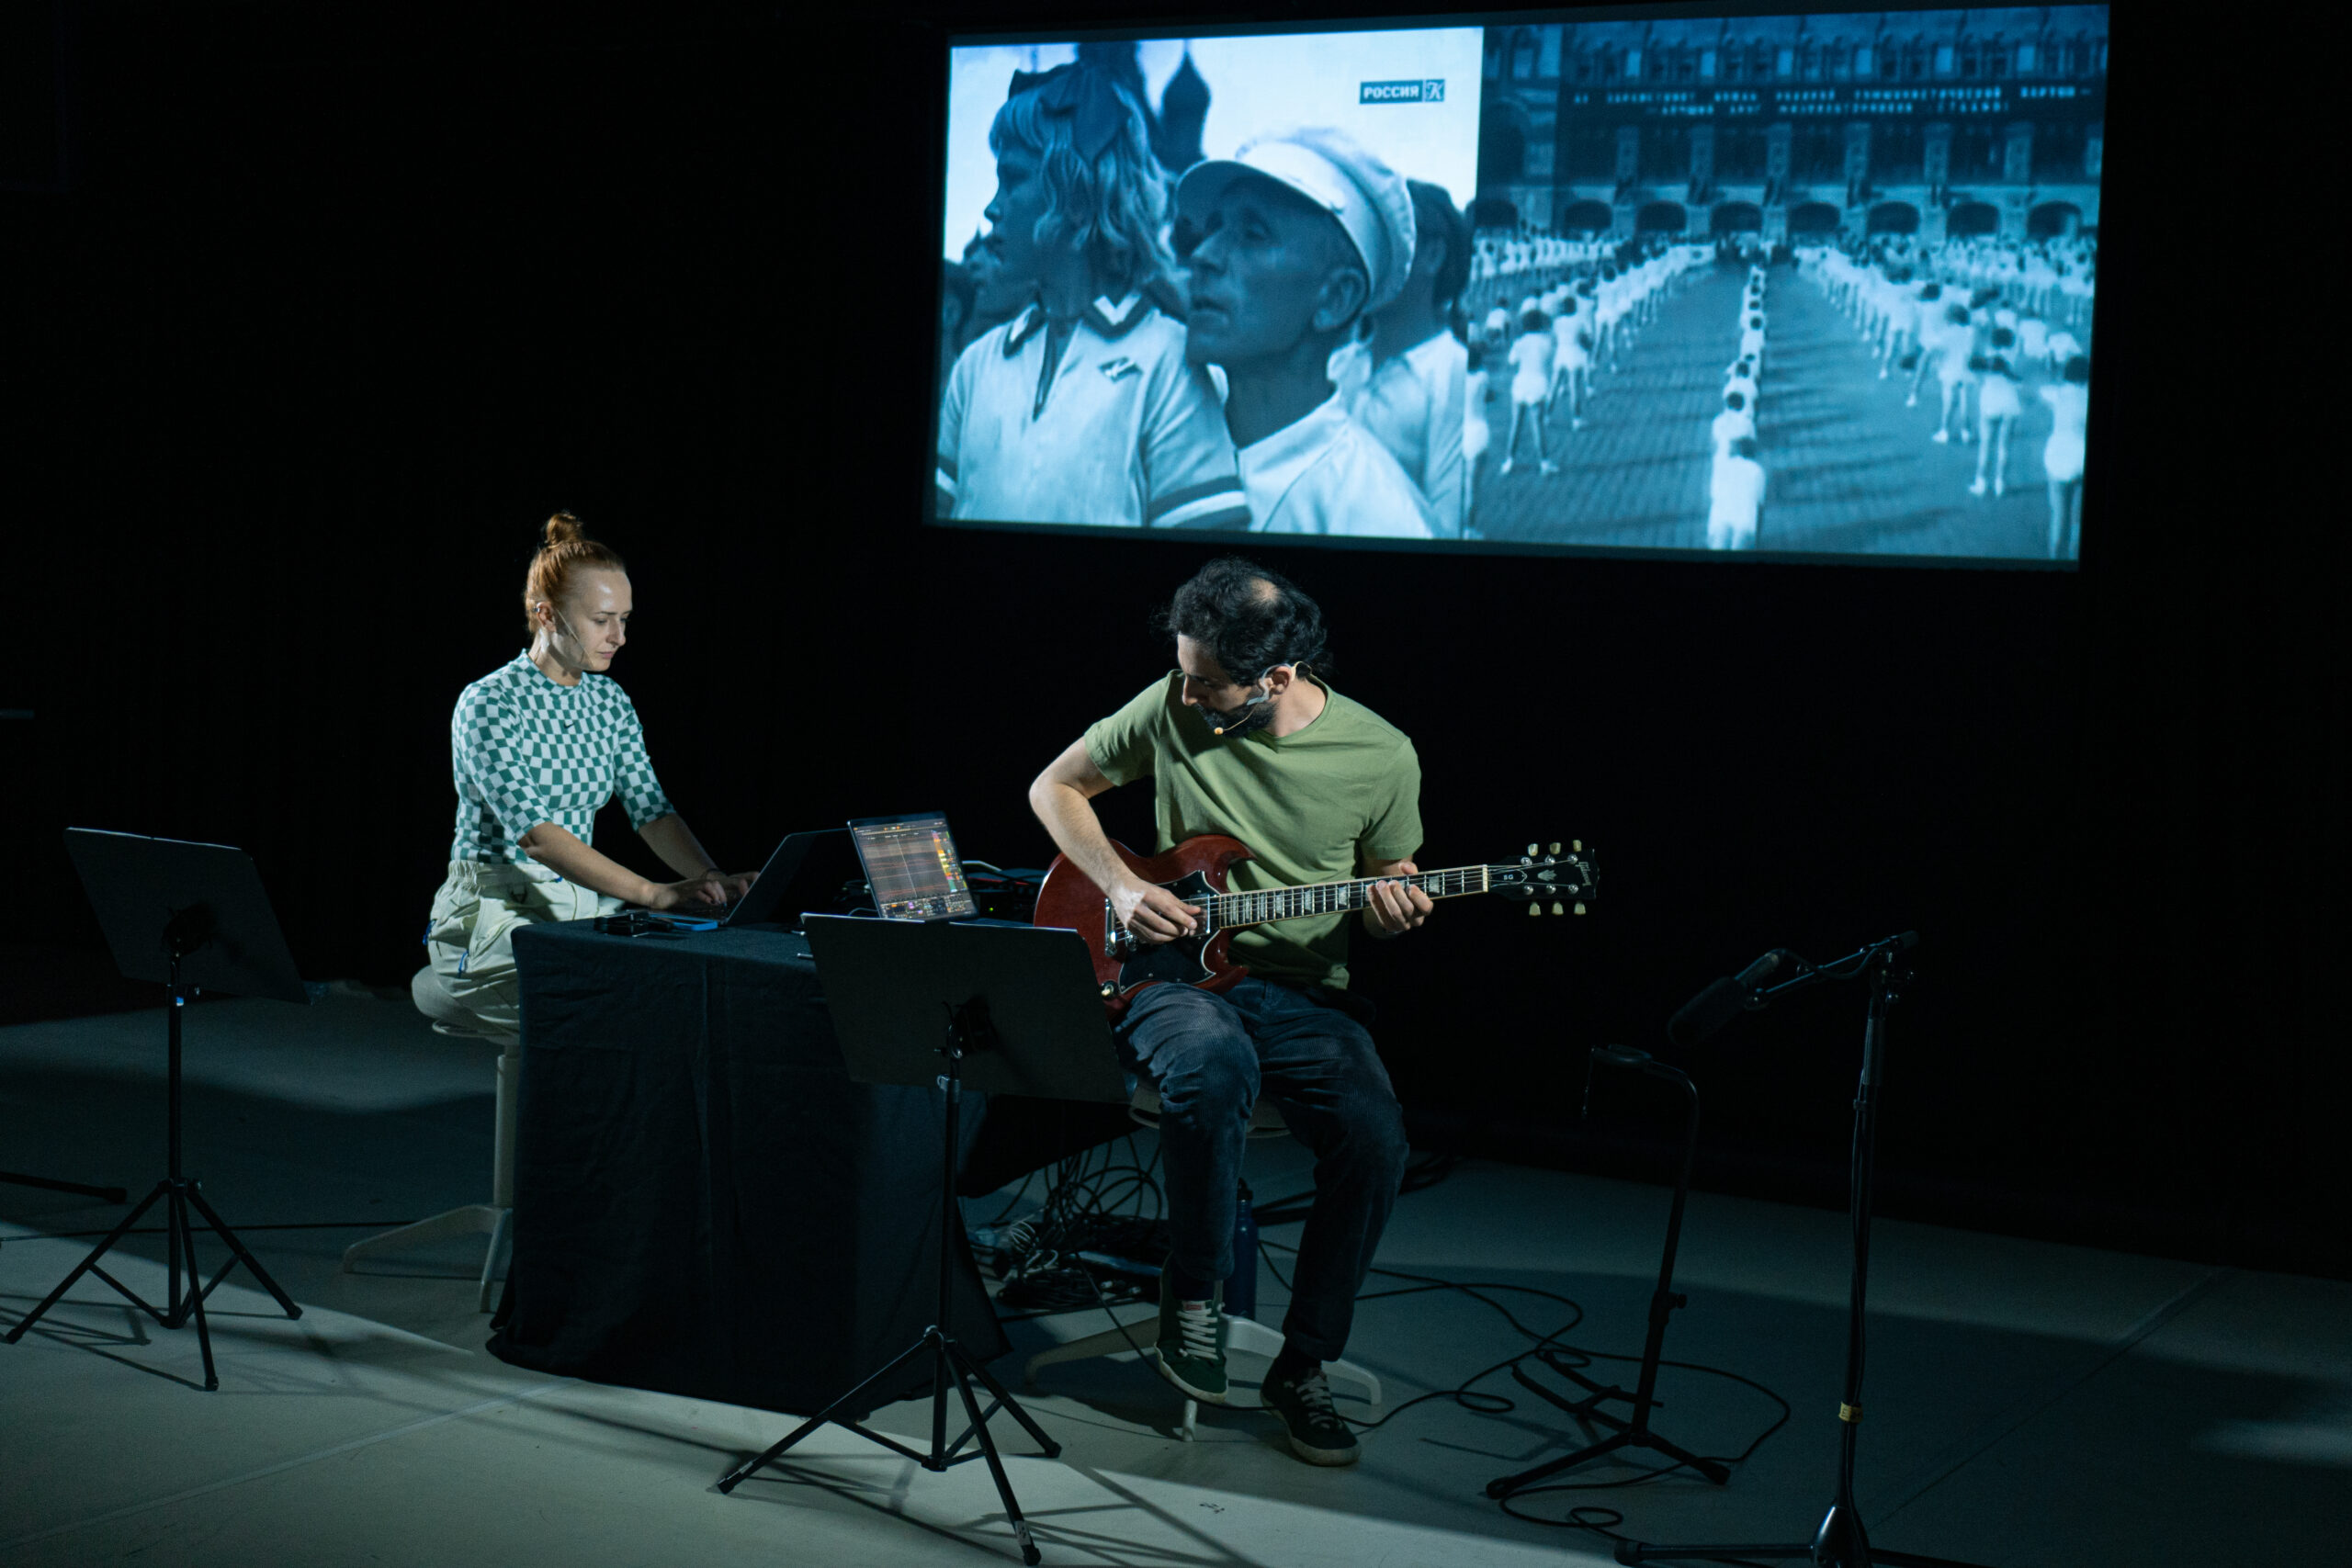 Two performers on stage, one operating a laptop and the other playing a guitar looking at a score. Projection in the background shows footage of a mass dance